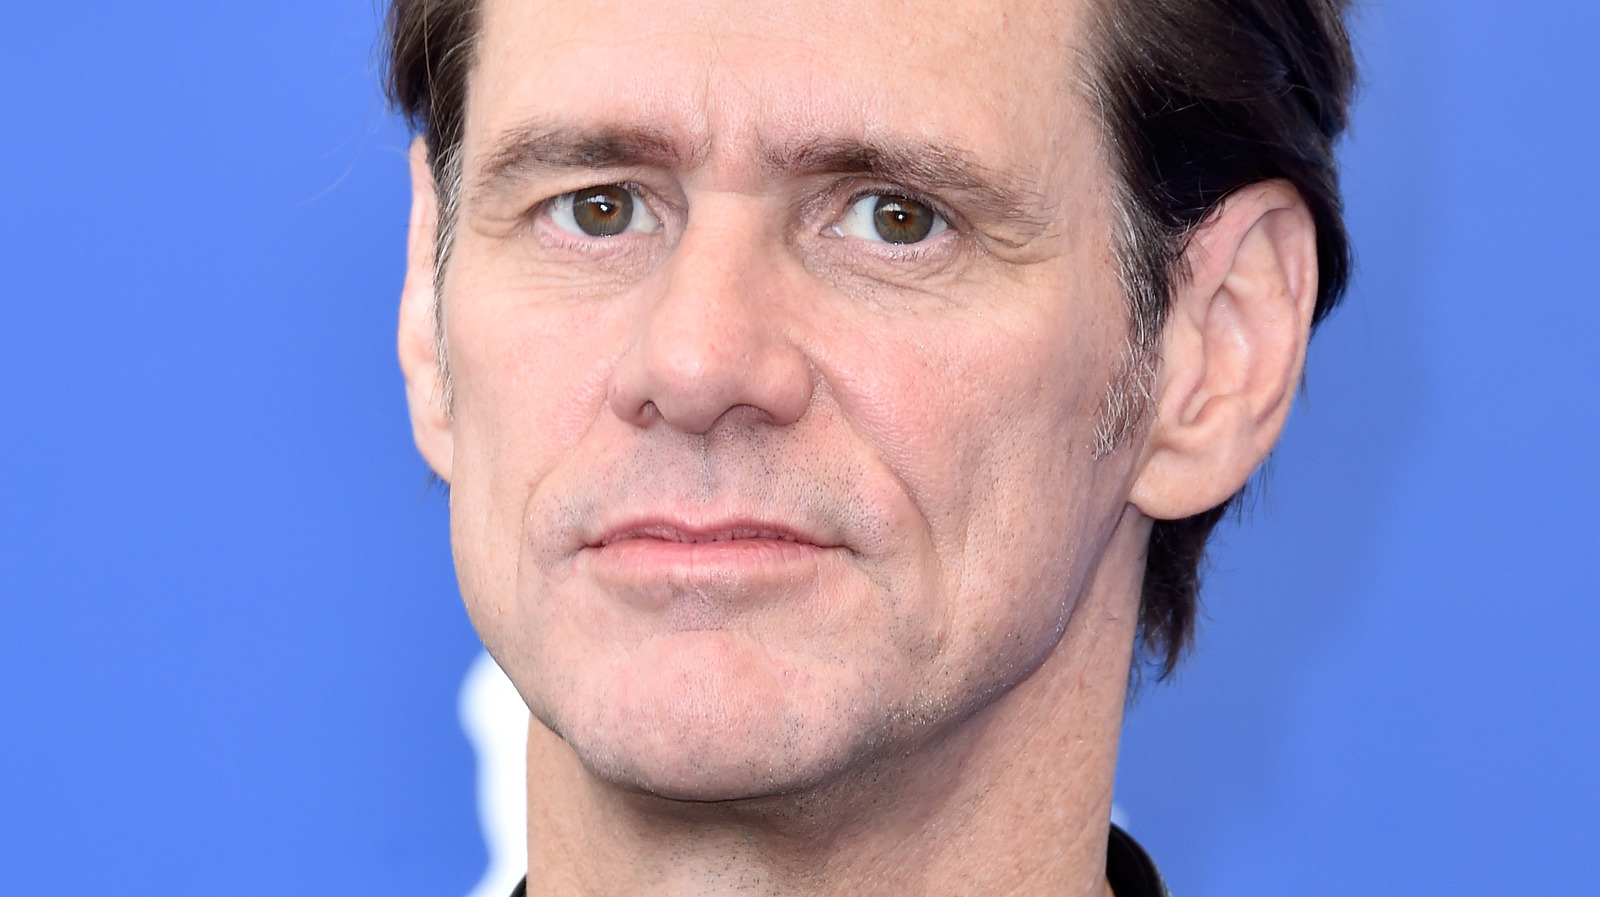 The Real Reason Jim Carrey Dyed His Hair Blue: A Look at His Personal Life - wide 2